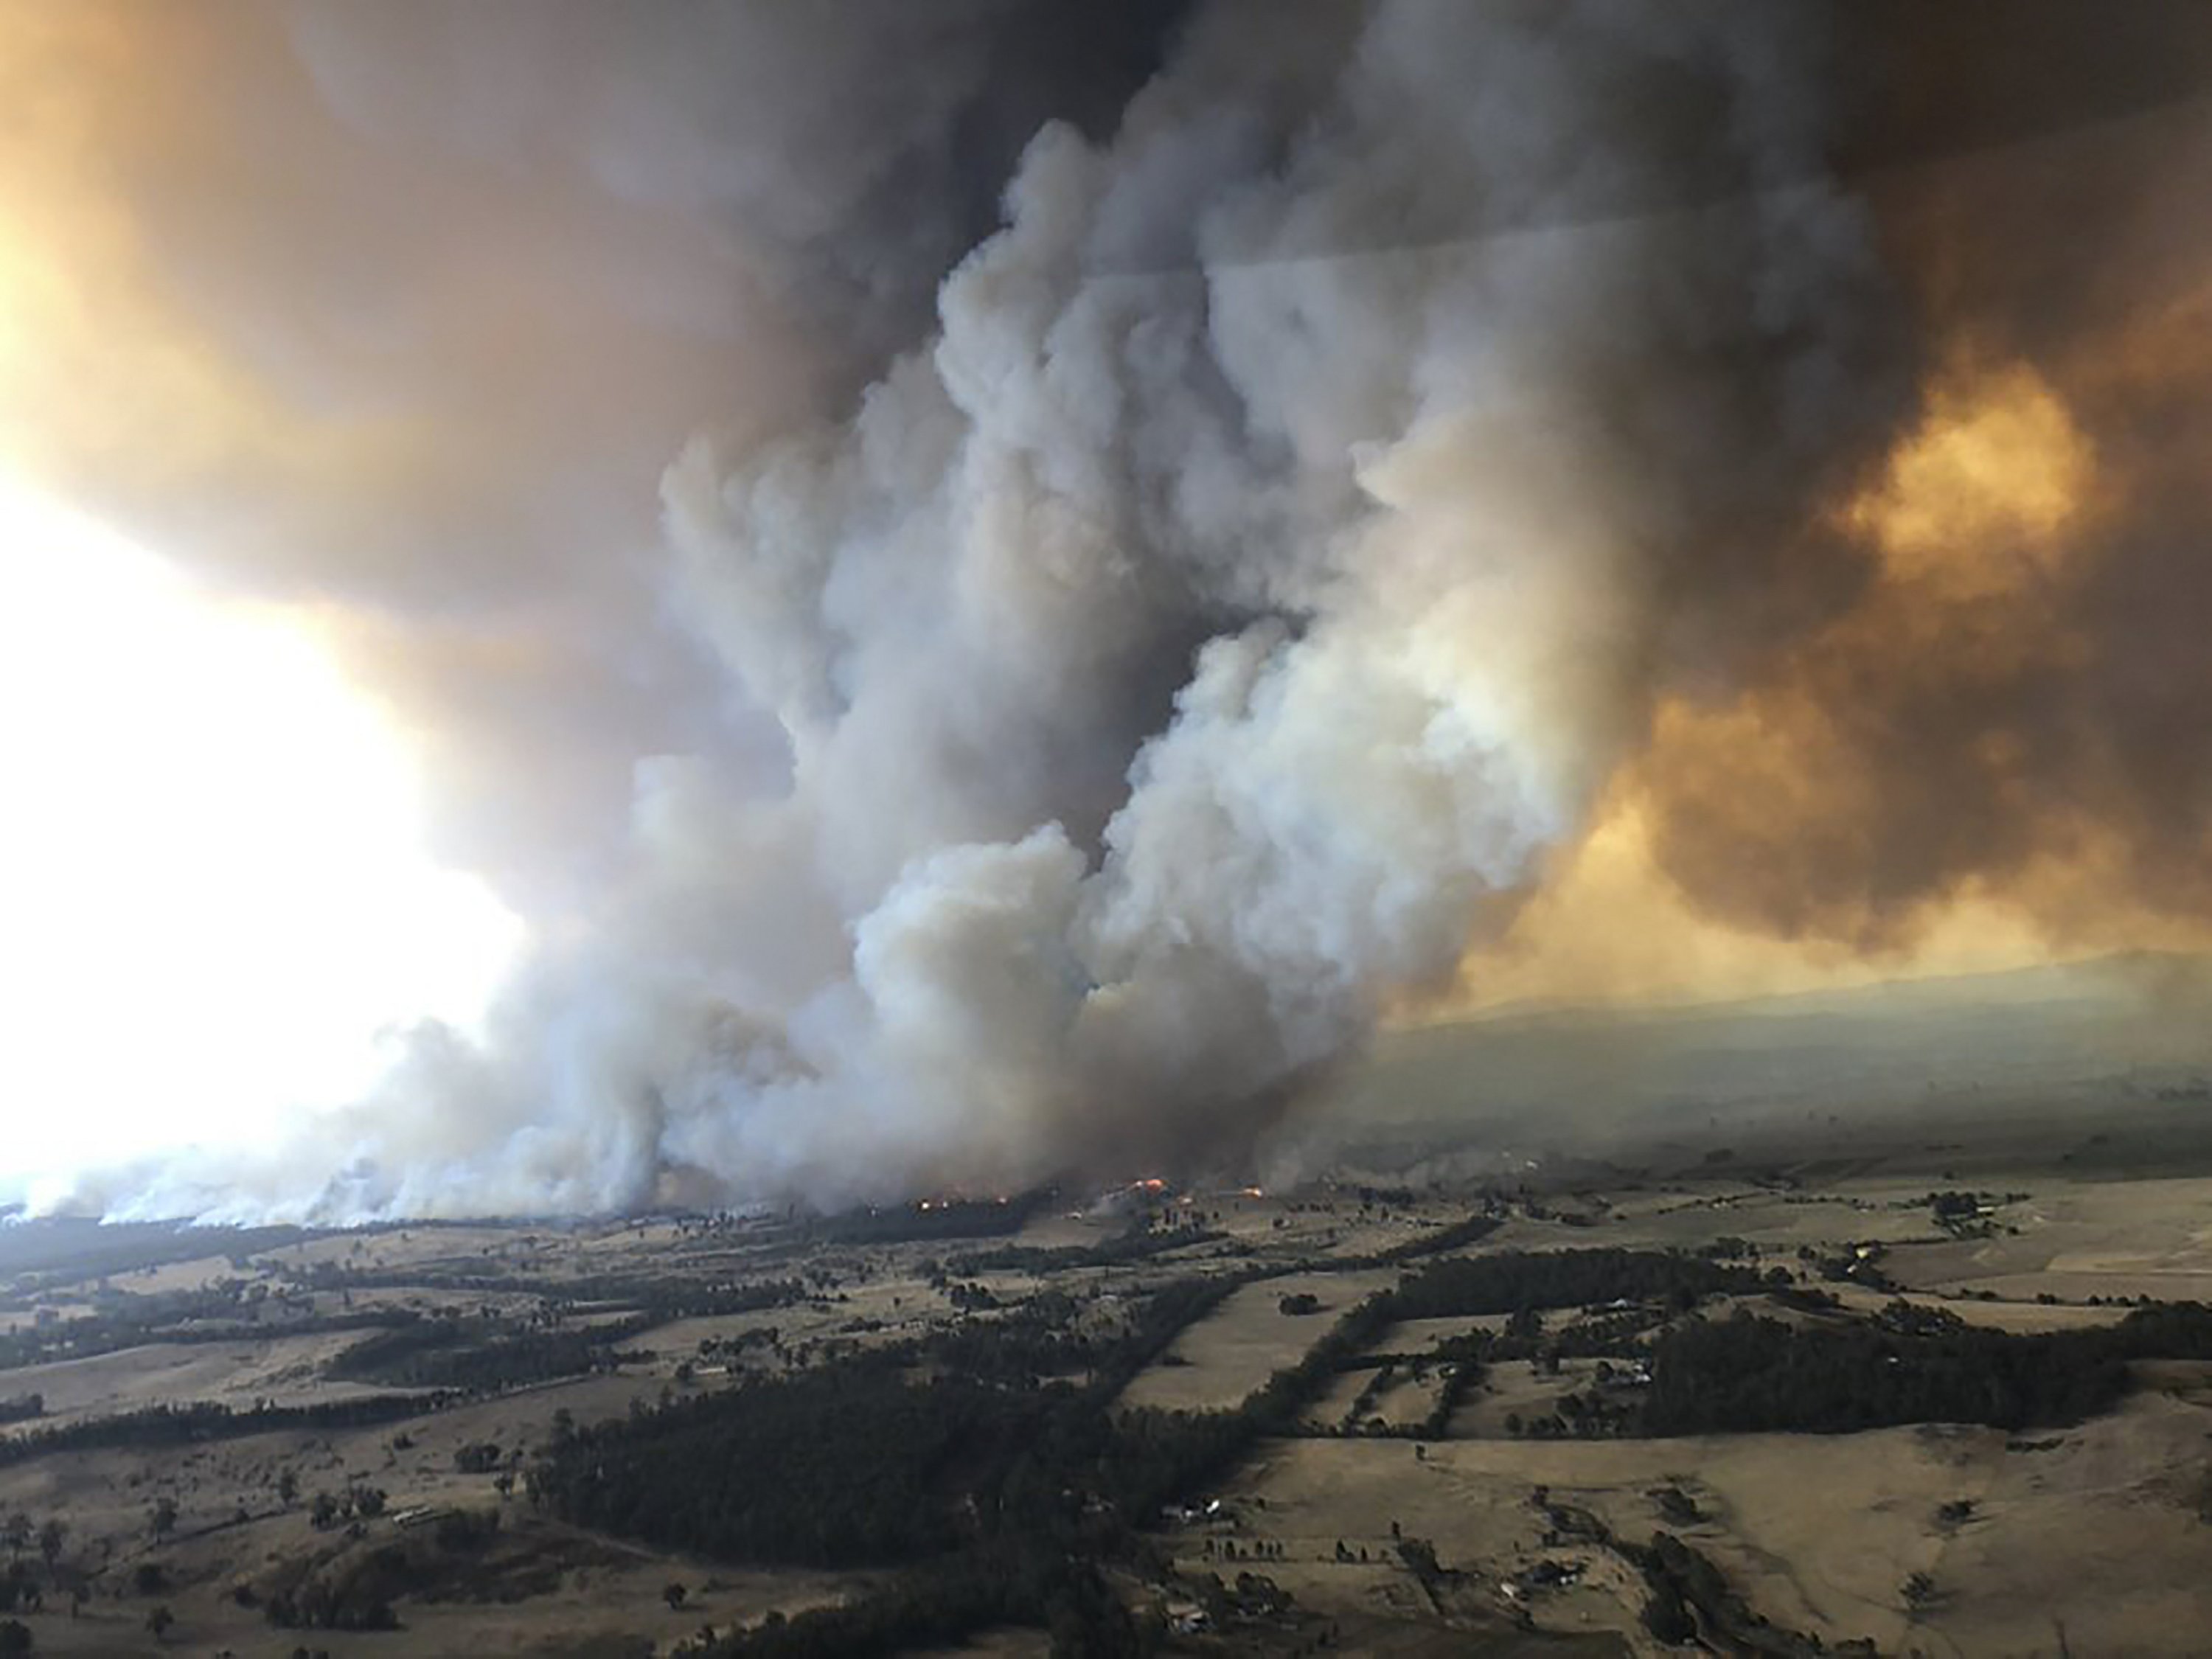 Q&A: How climate change, other factors stoke Australia fires - The Associated Press